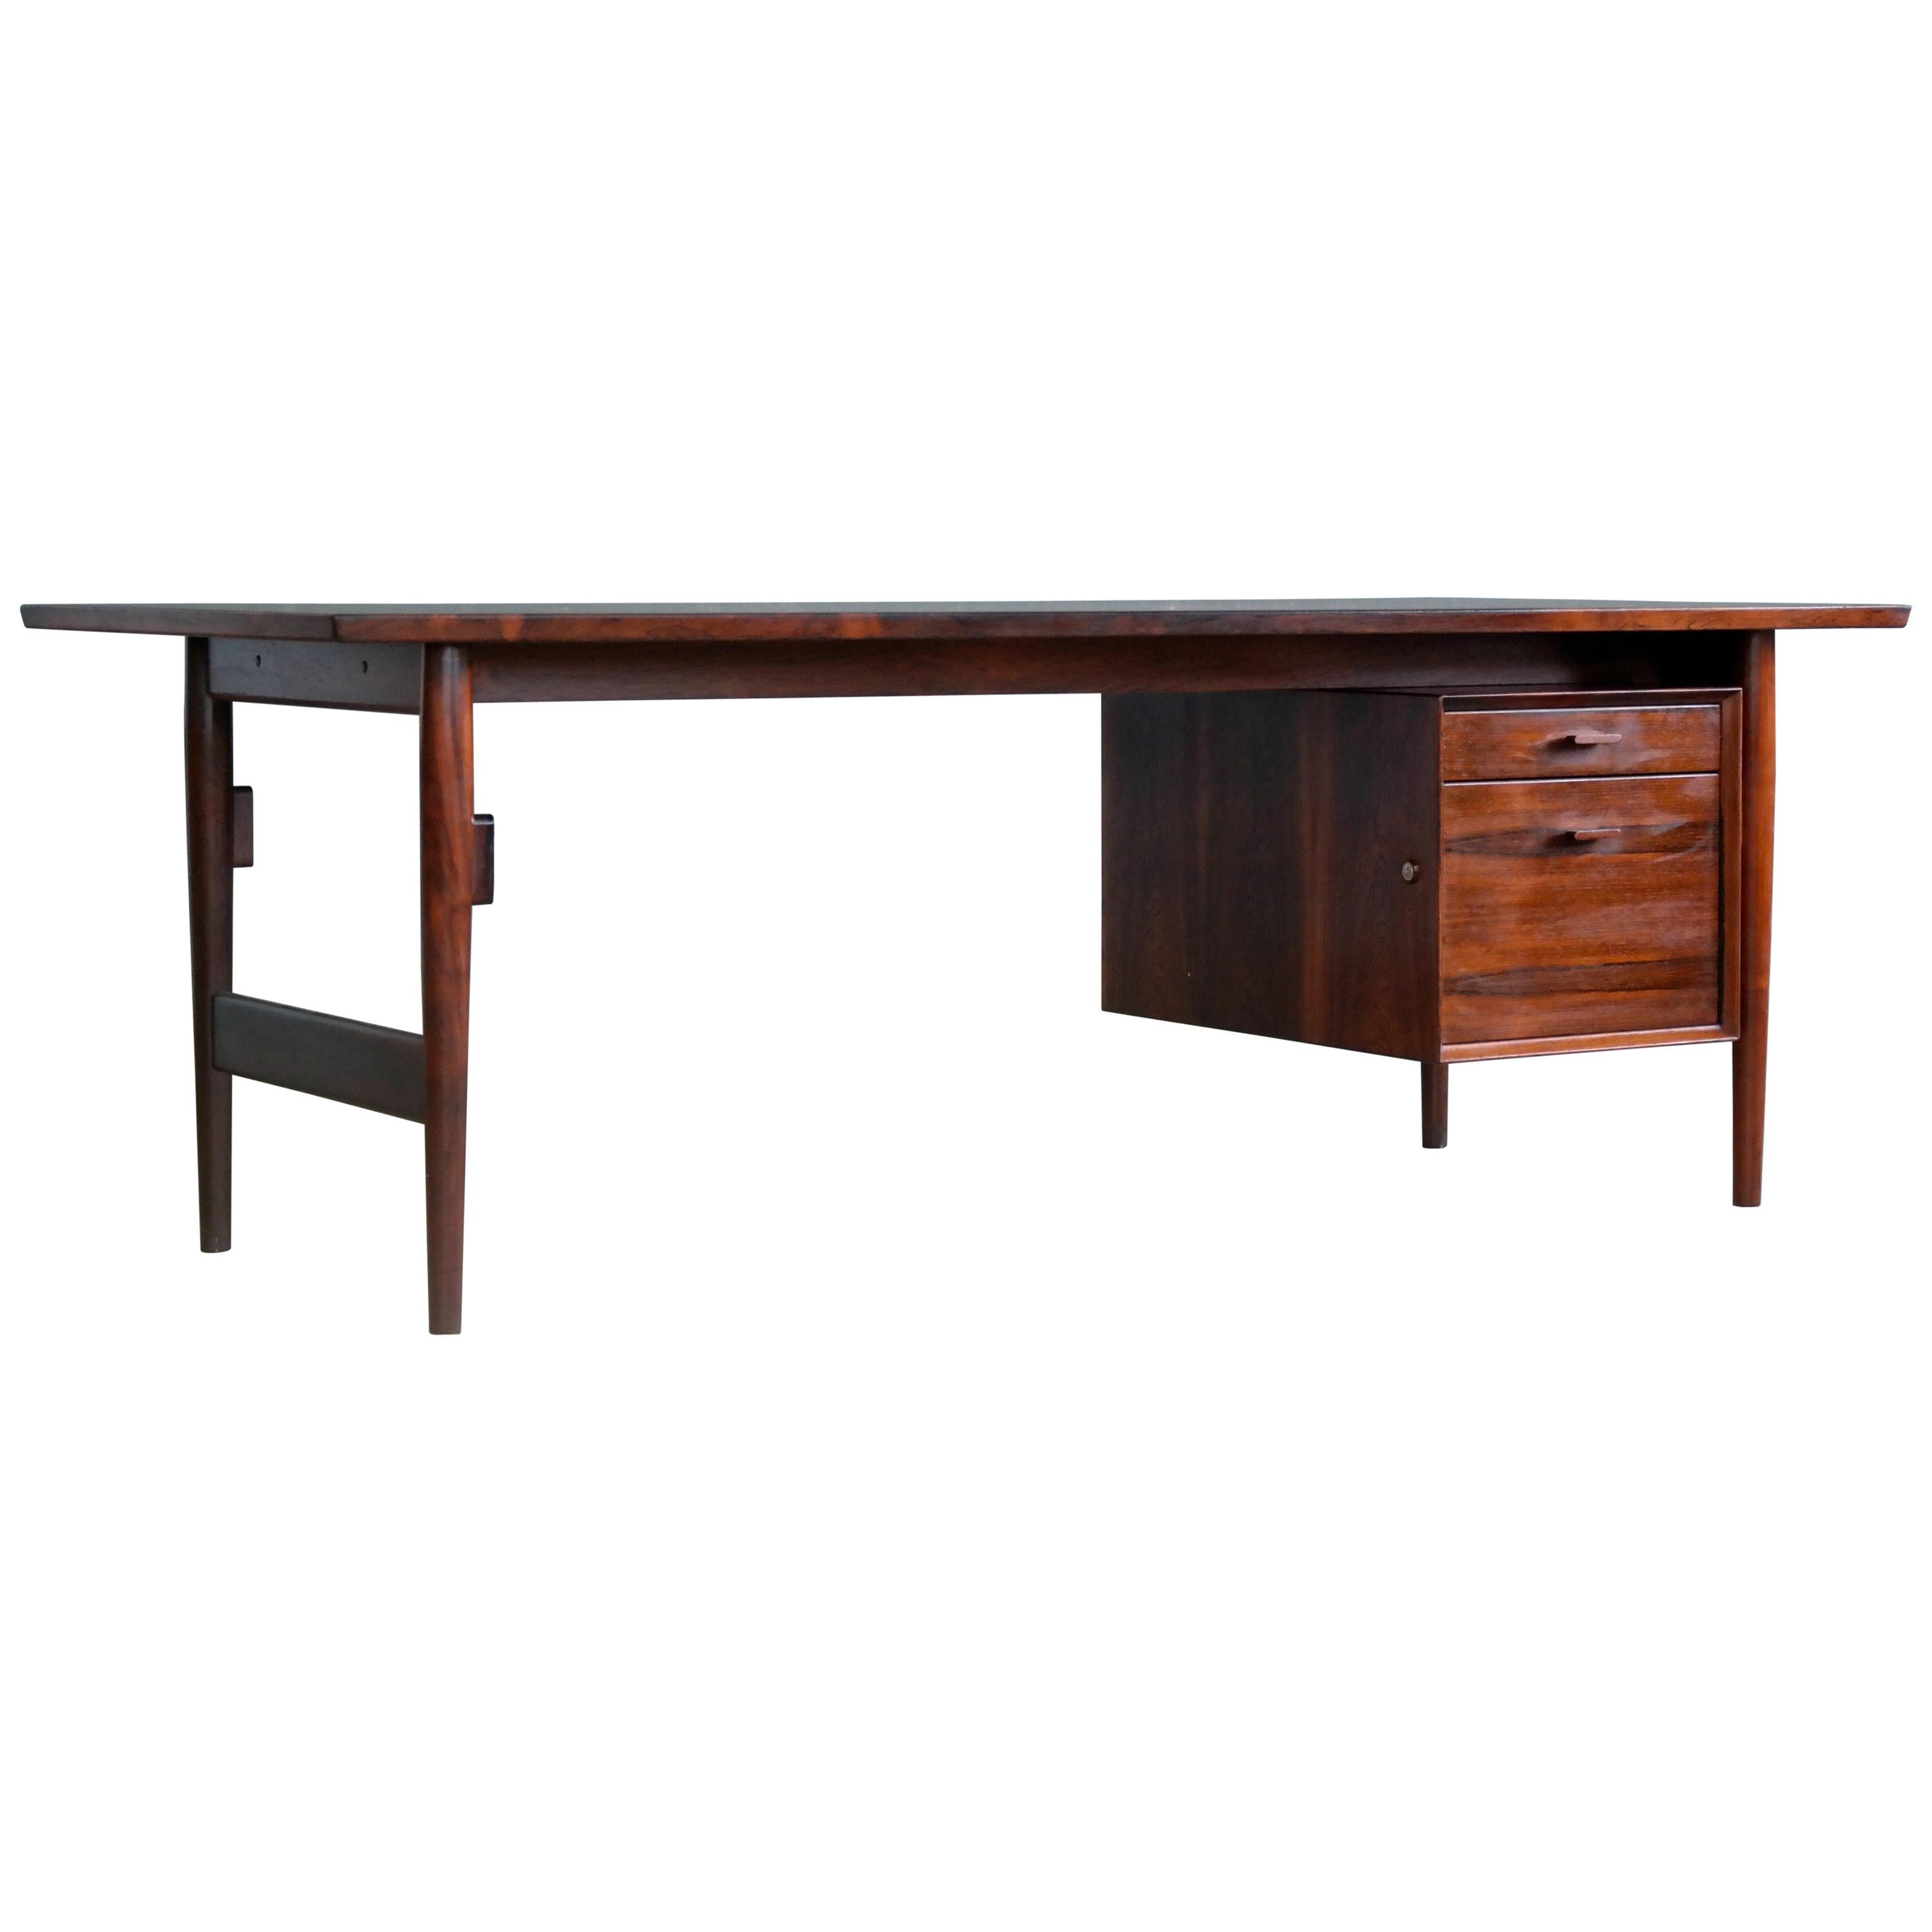 Executive Rosewood Desk by Arne Vodder for Sibast from 1950s